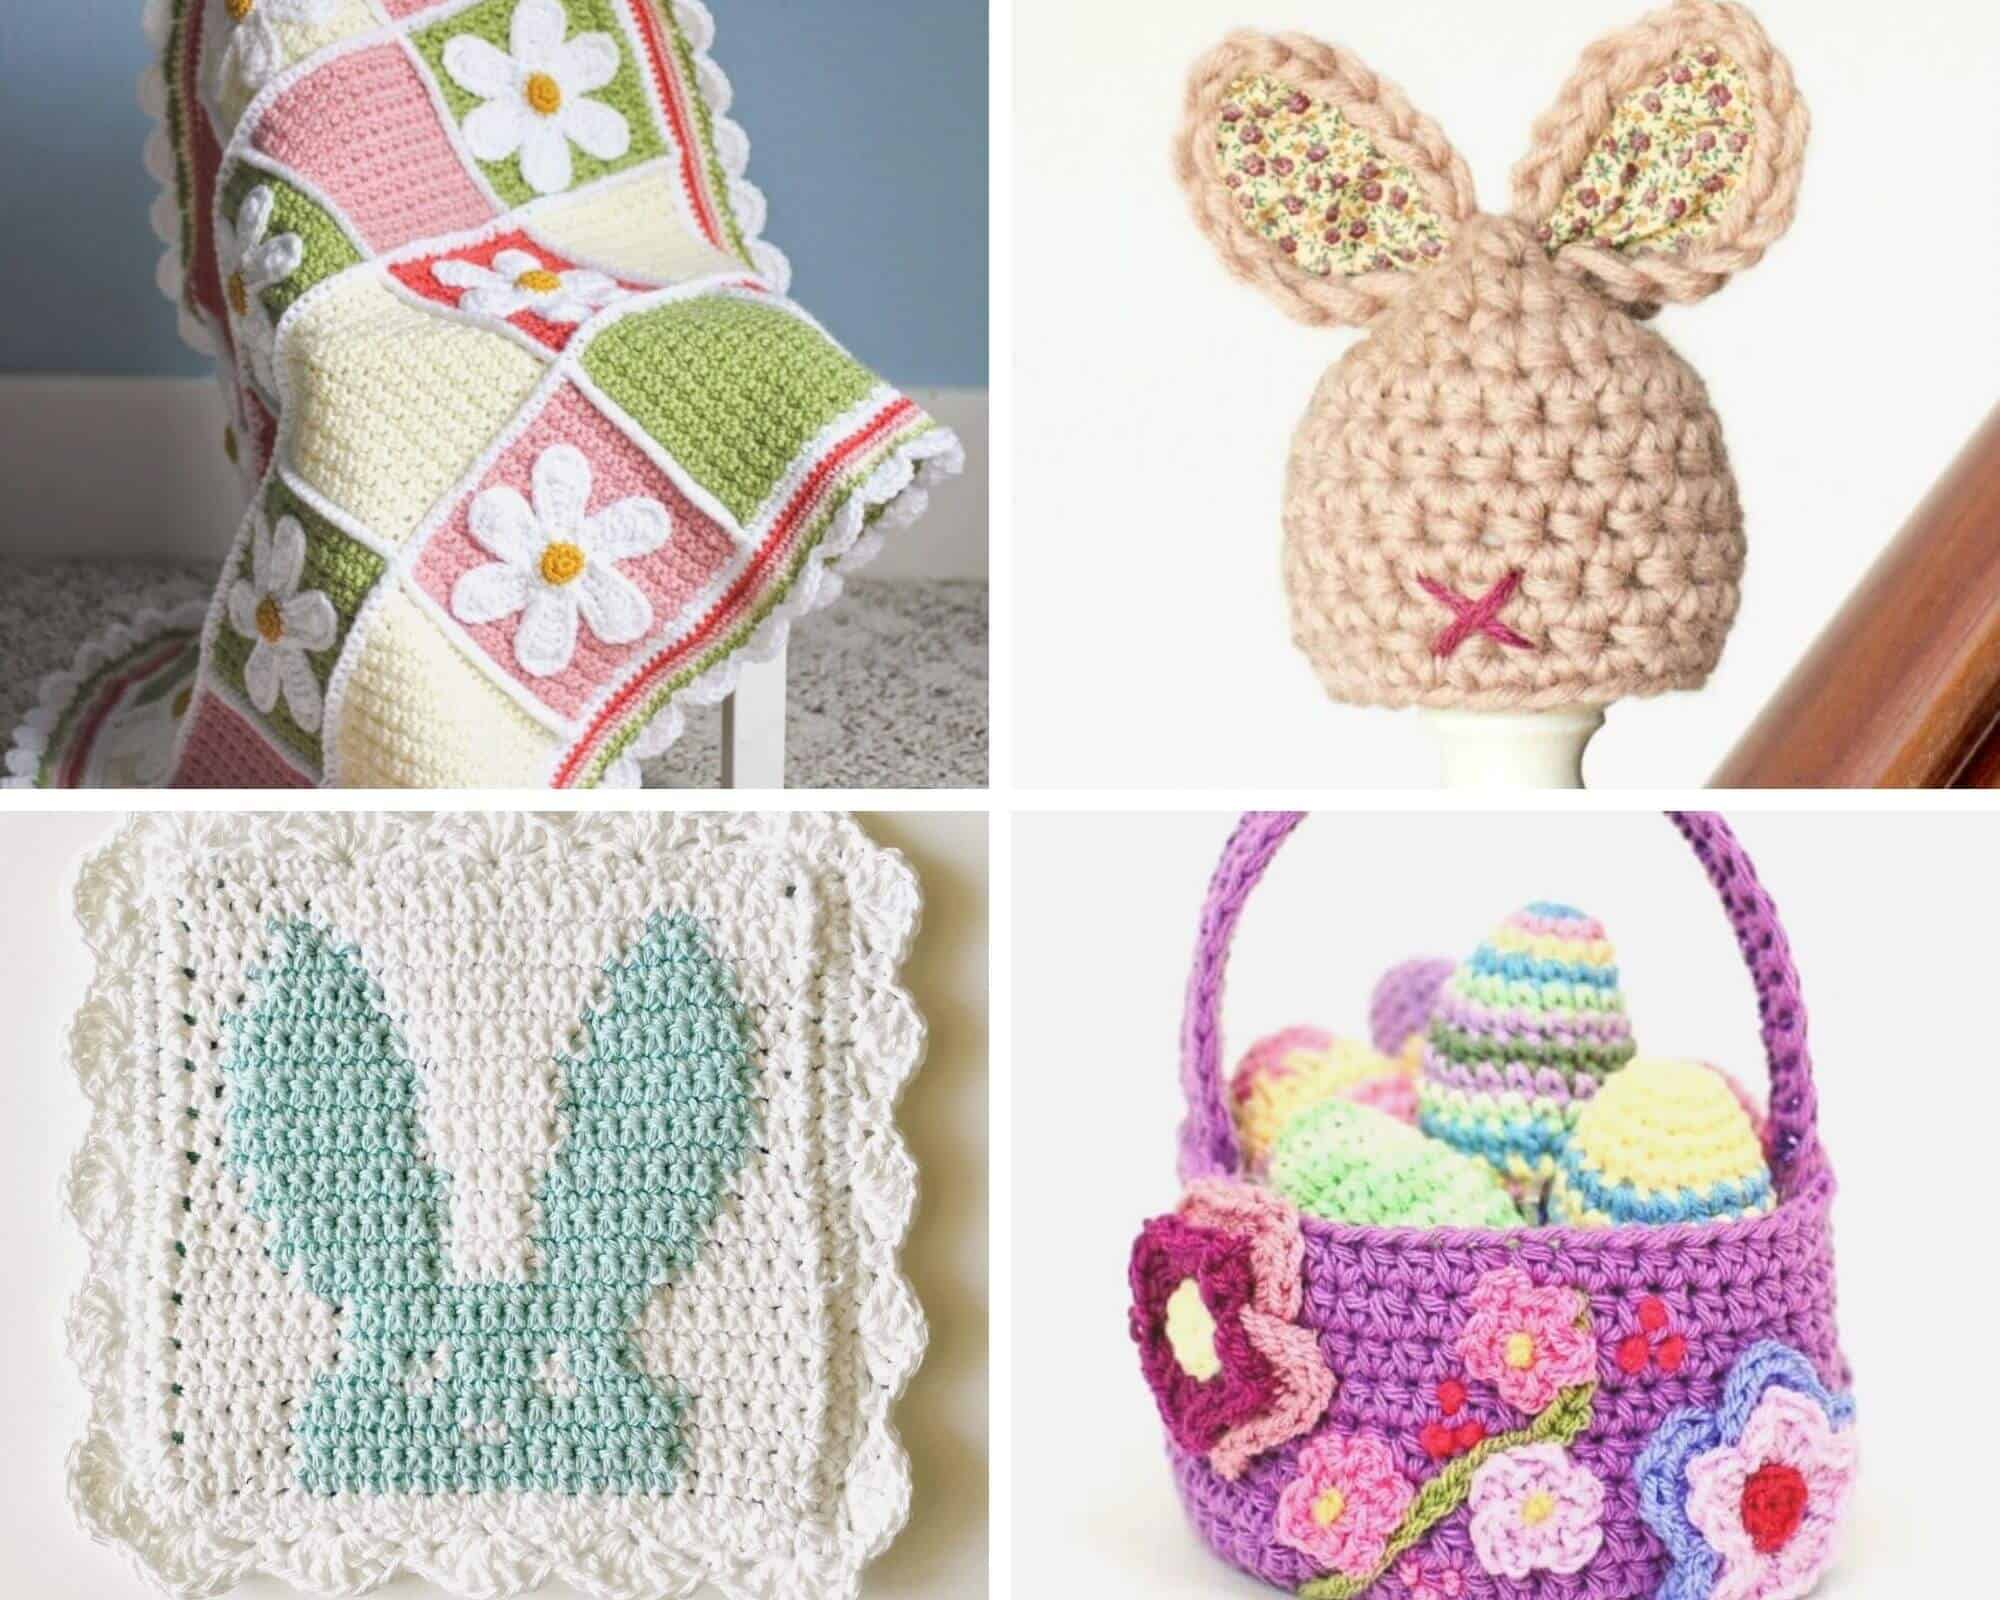 Crochet blankets, hats, and baskets. 